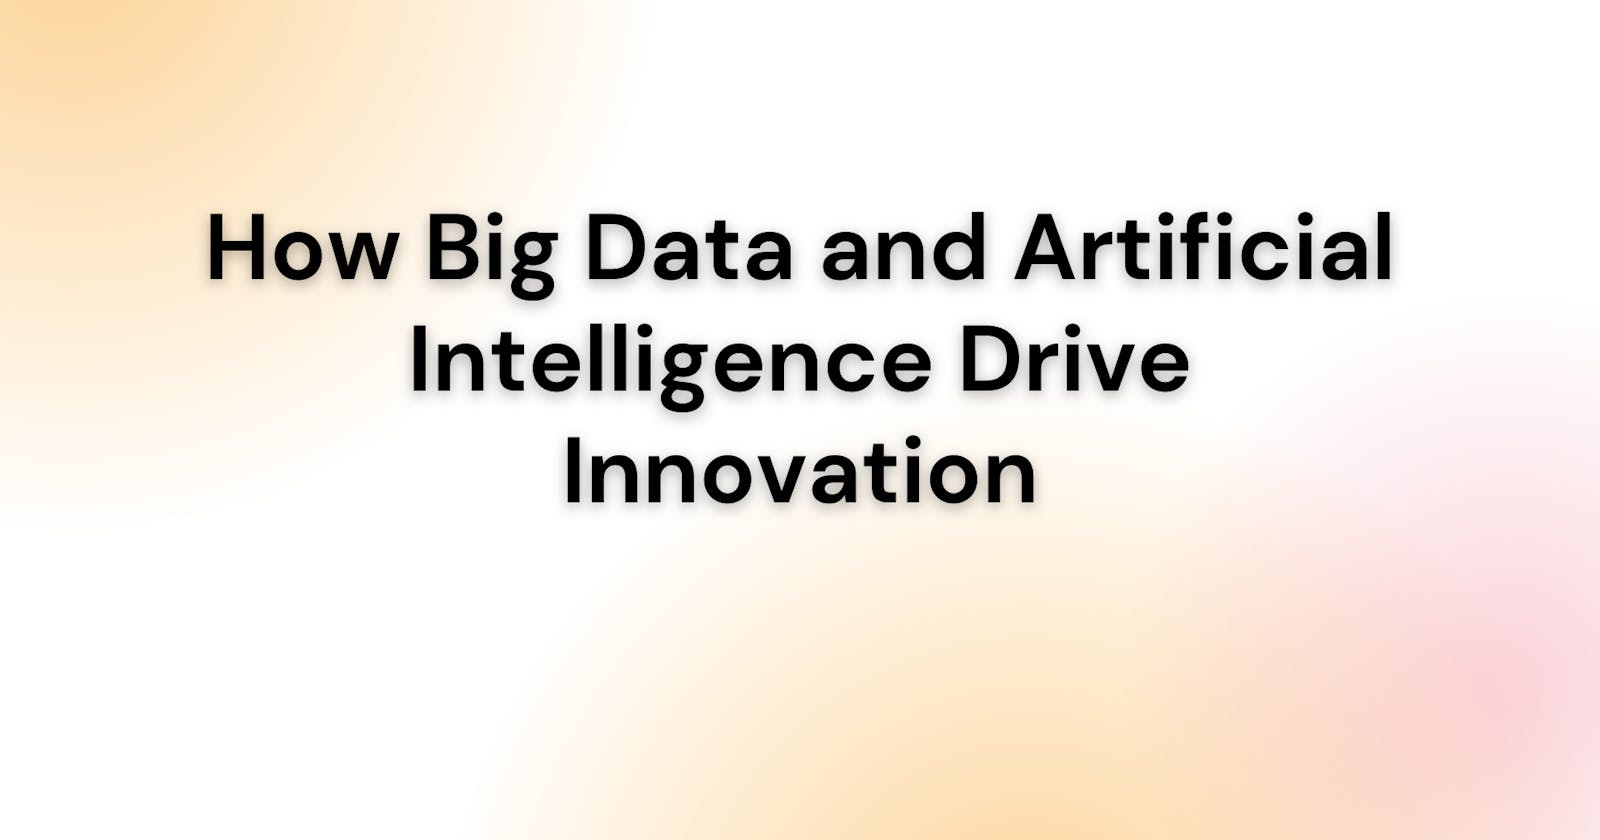 How Big Data and Artificial Intelligence Drive Innovation